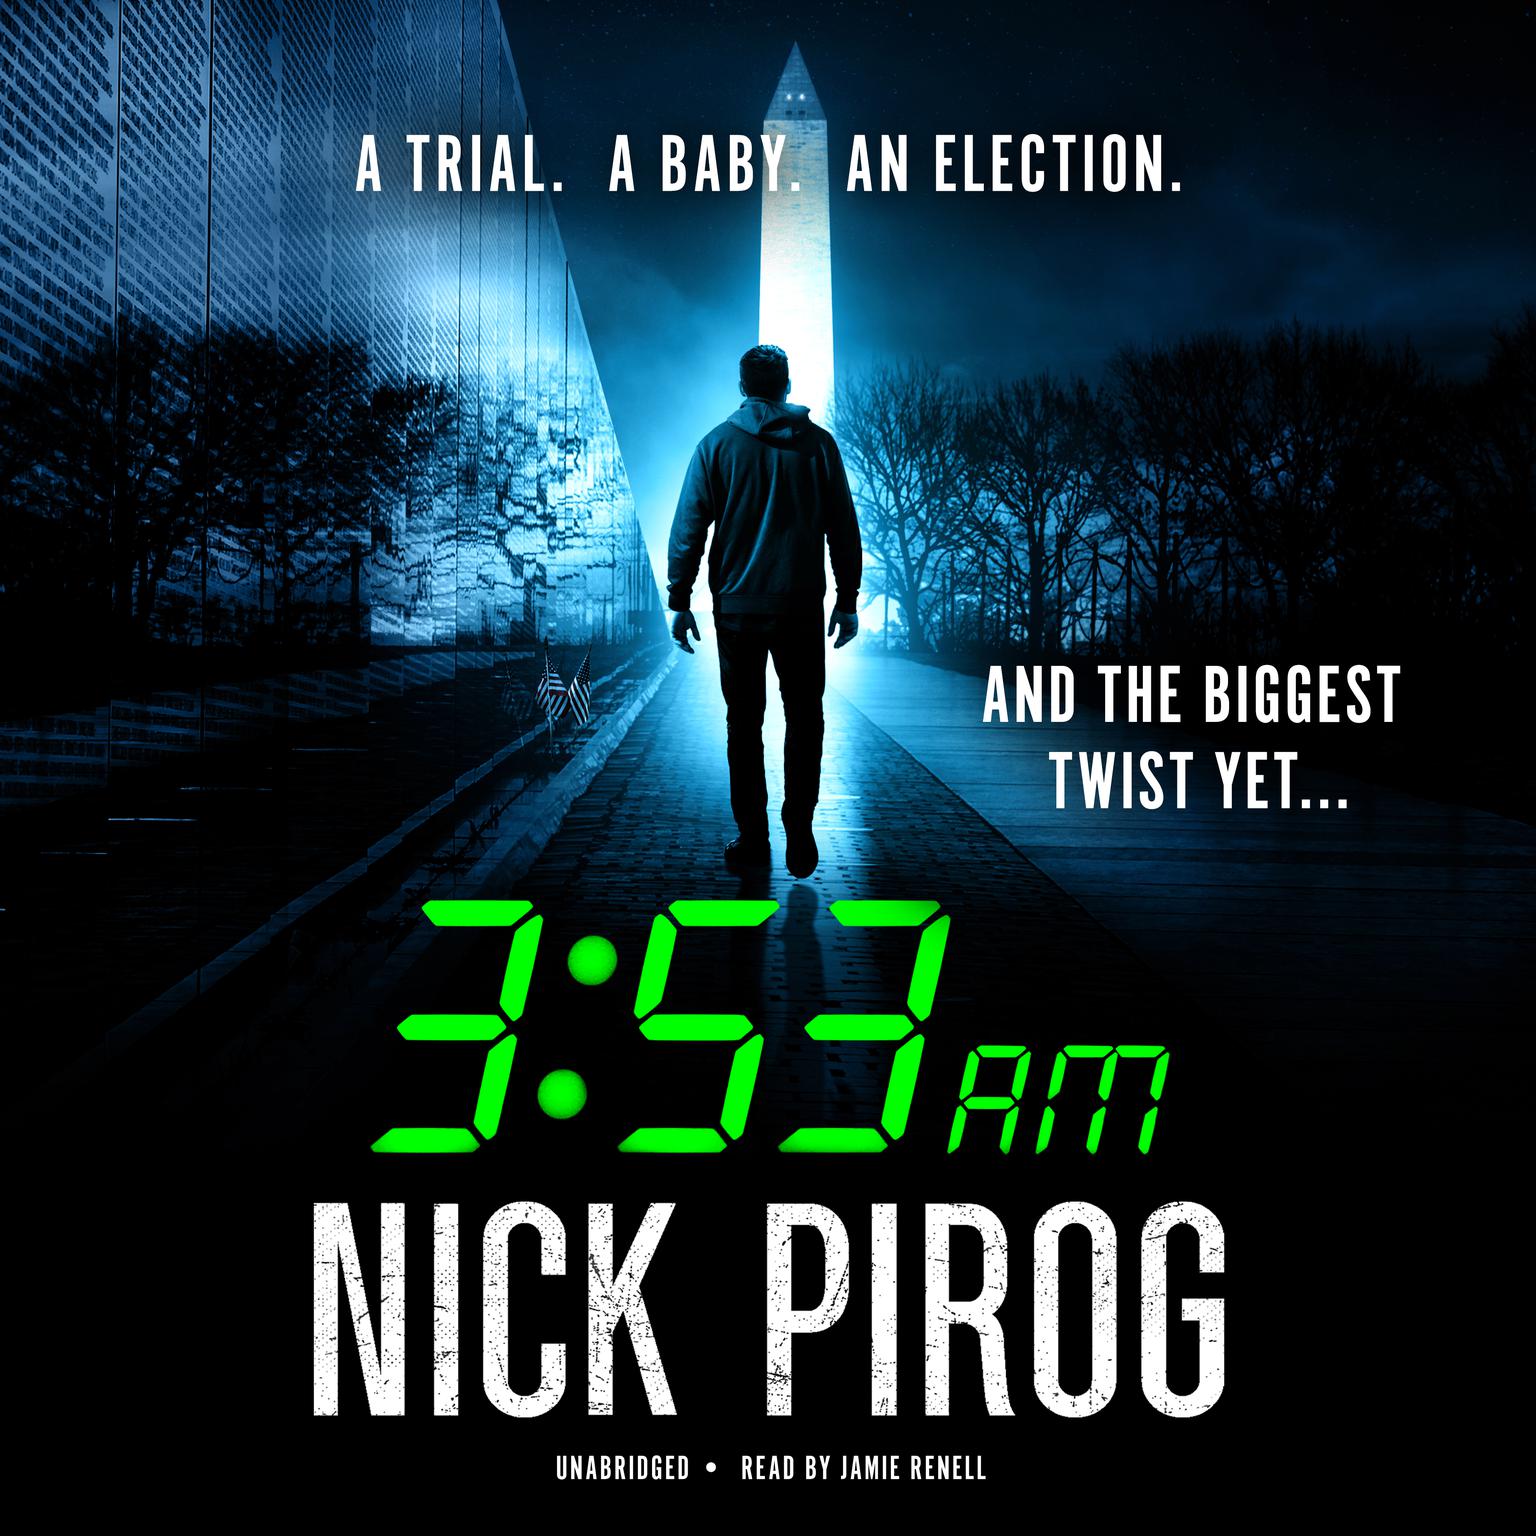 3:53 a.m. Audiobook, by Nick Pirog